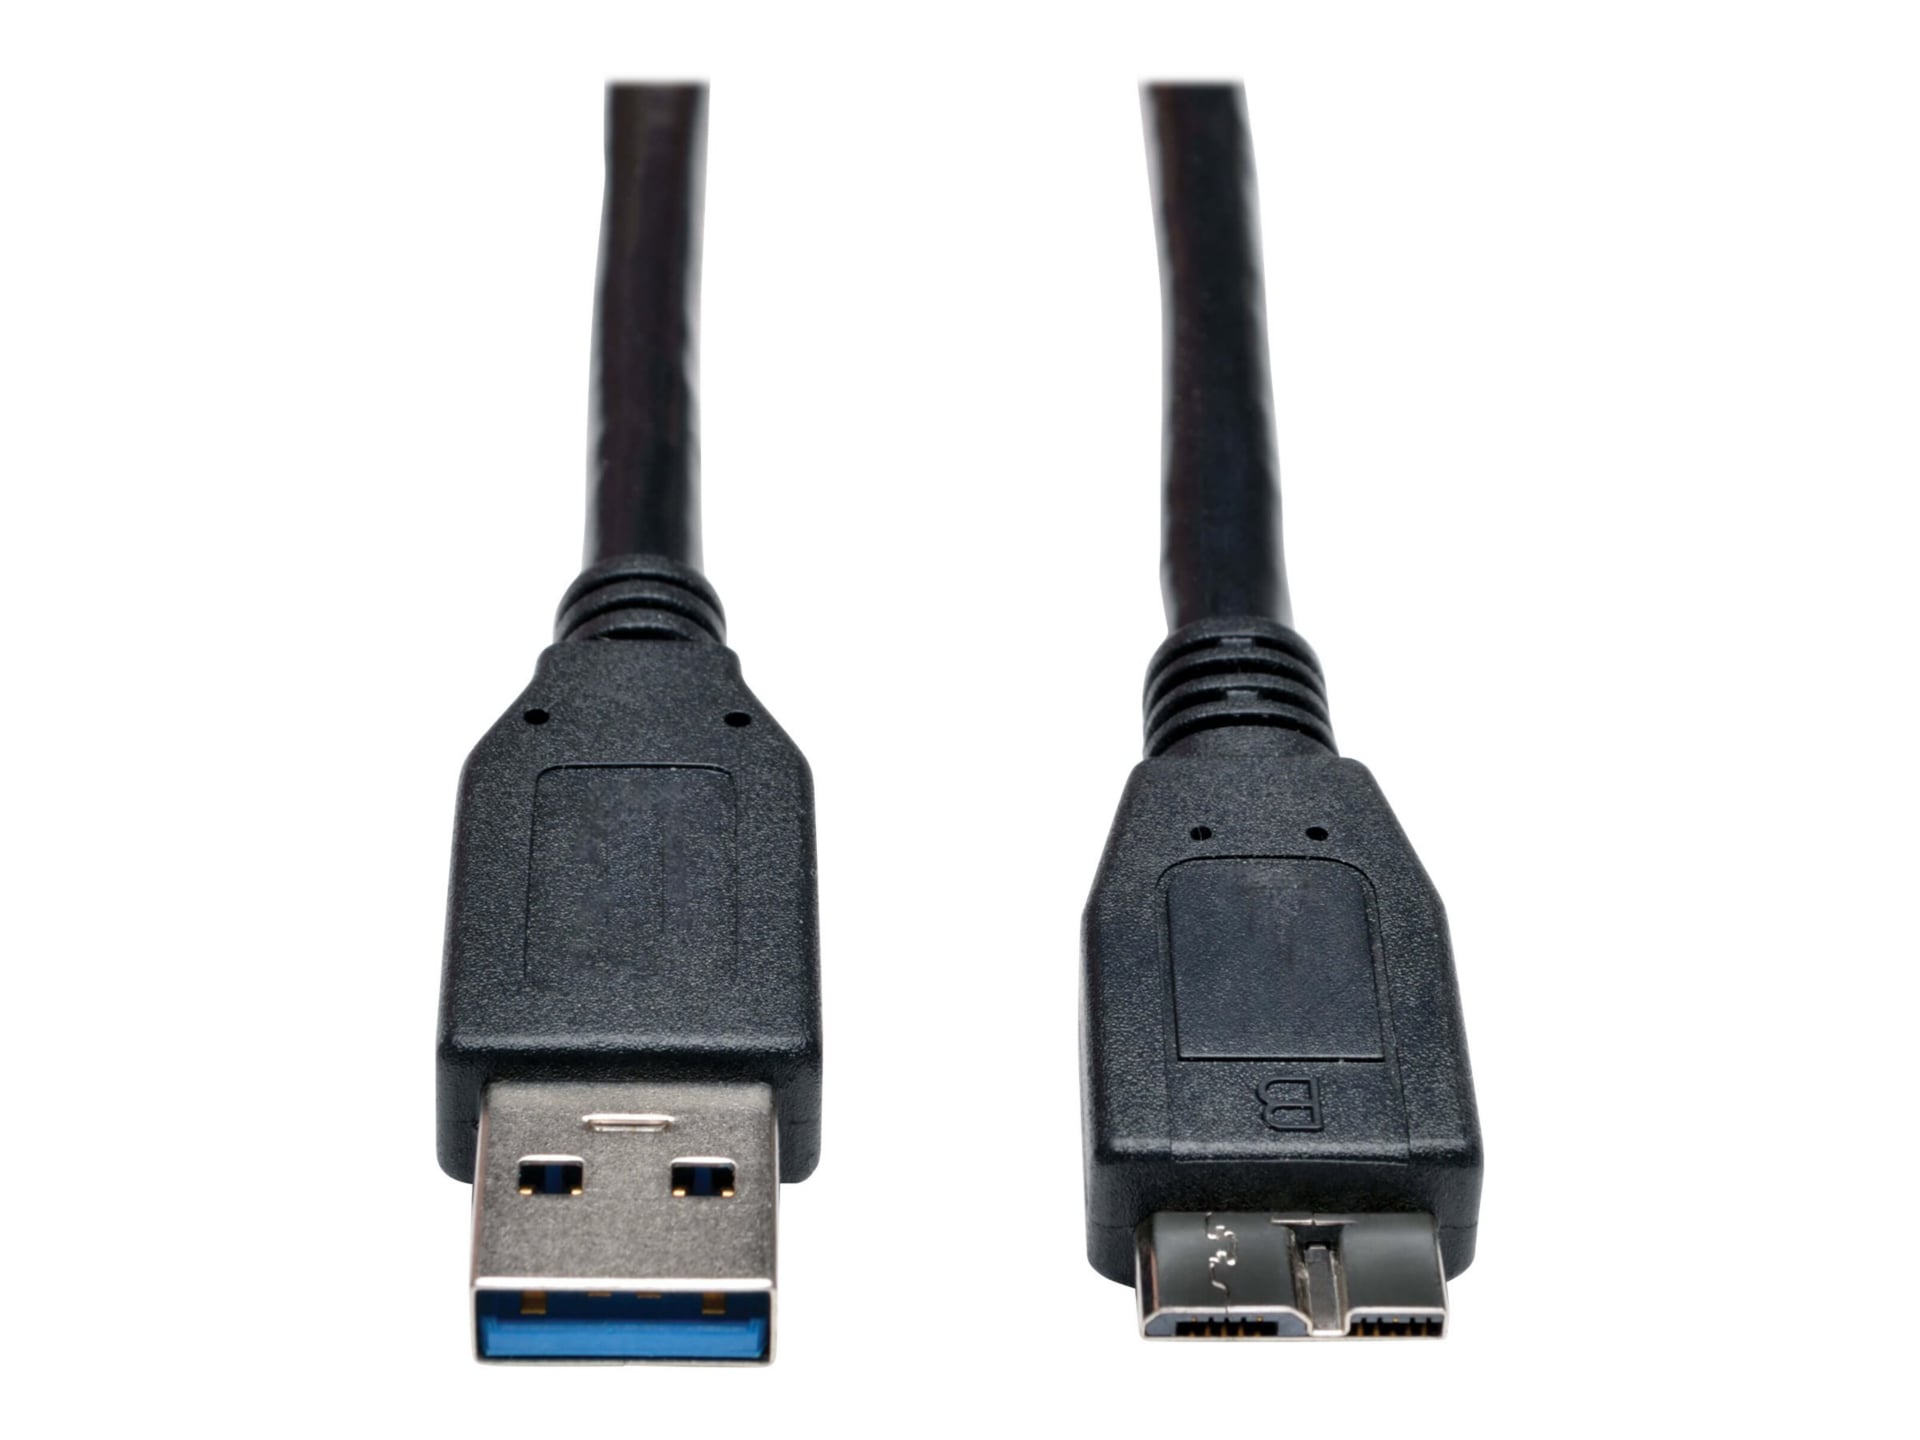 Eaton Tripp Lite Series USB 3.0 SuperSpeed Device Cable (A to Micro-B M/M) Black, 6 ft. (1.83 m) - USB cable - Micro-USB